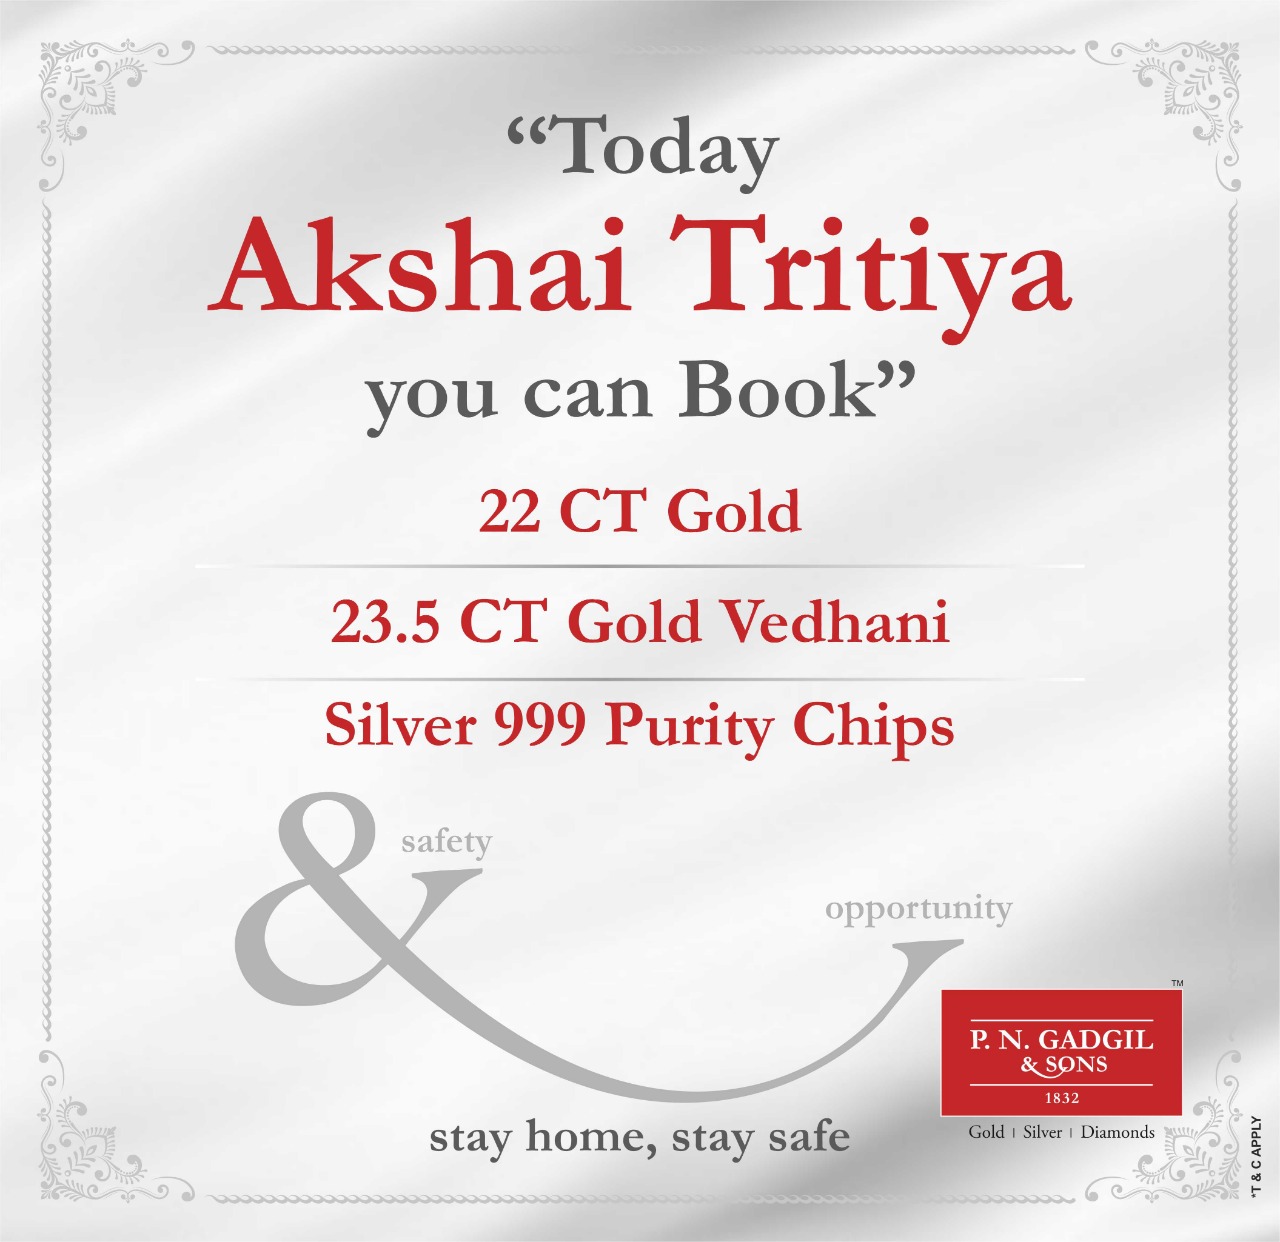 Akshay Tritiya – An Opportunity to Invest in Gold